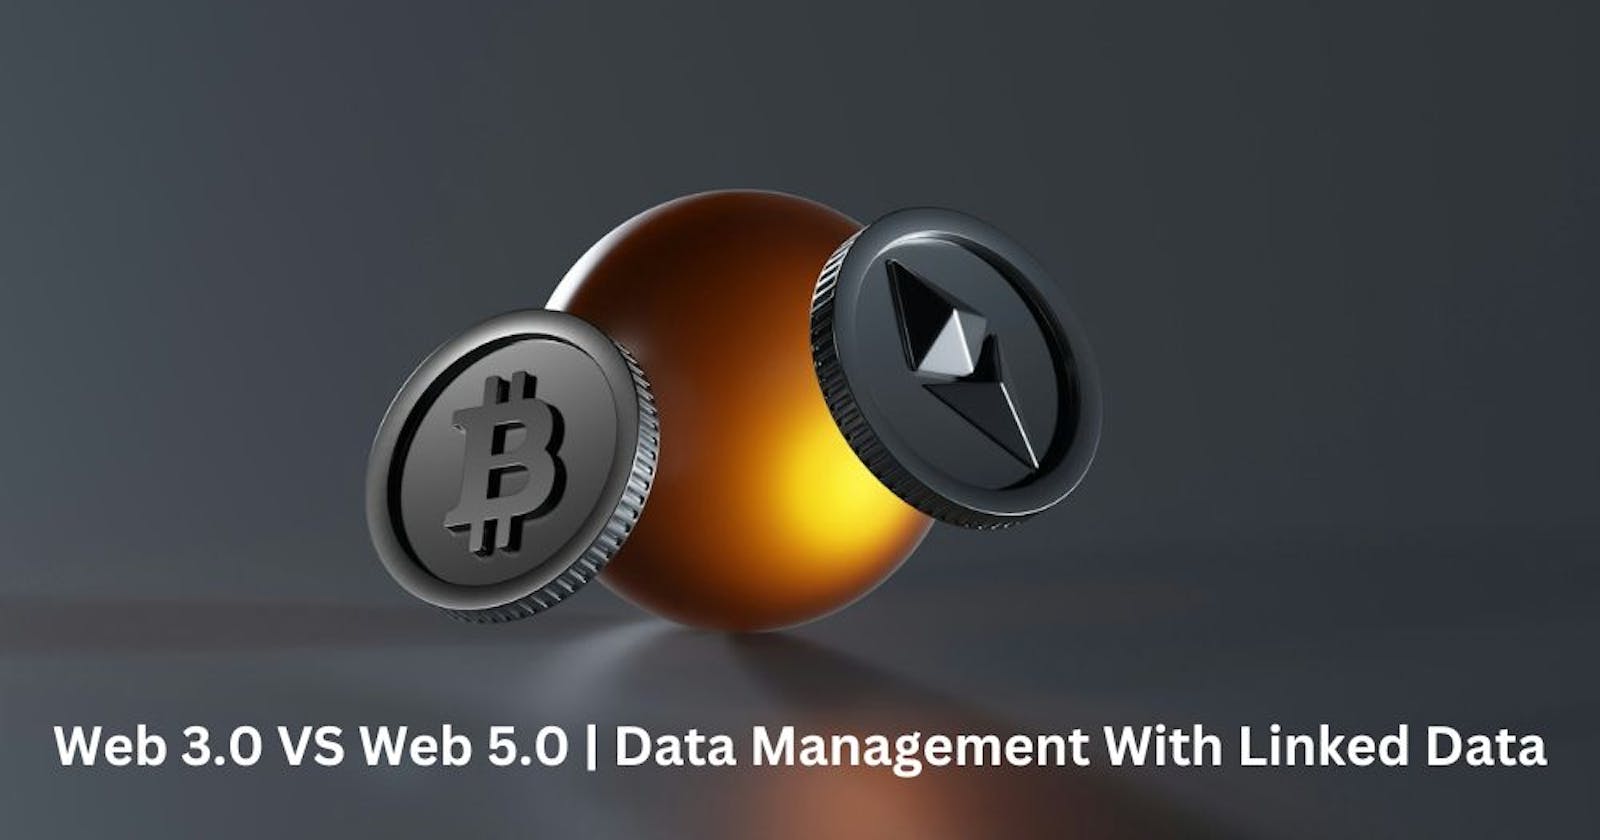 Web 3.0 and Web 5.0: The Evolution Of Data Management With Linked Data